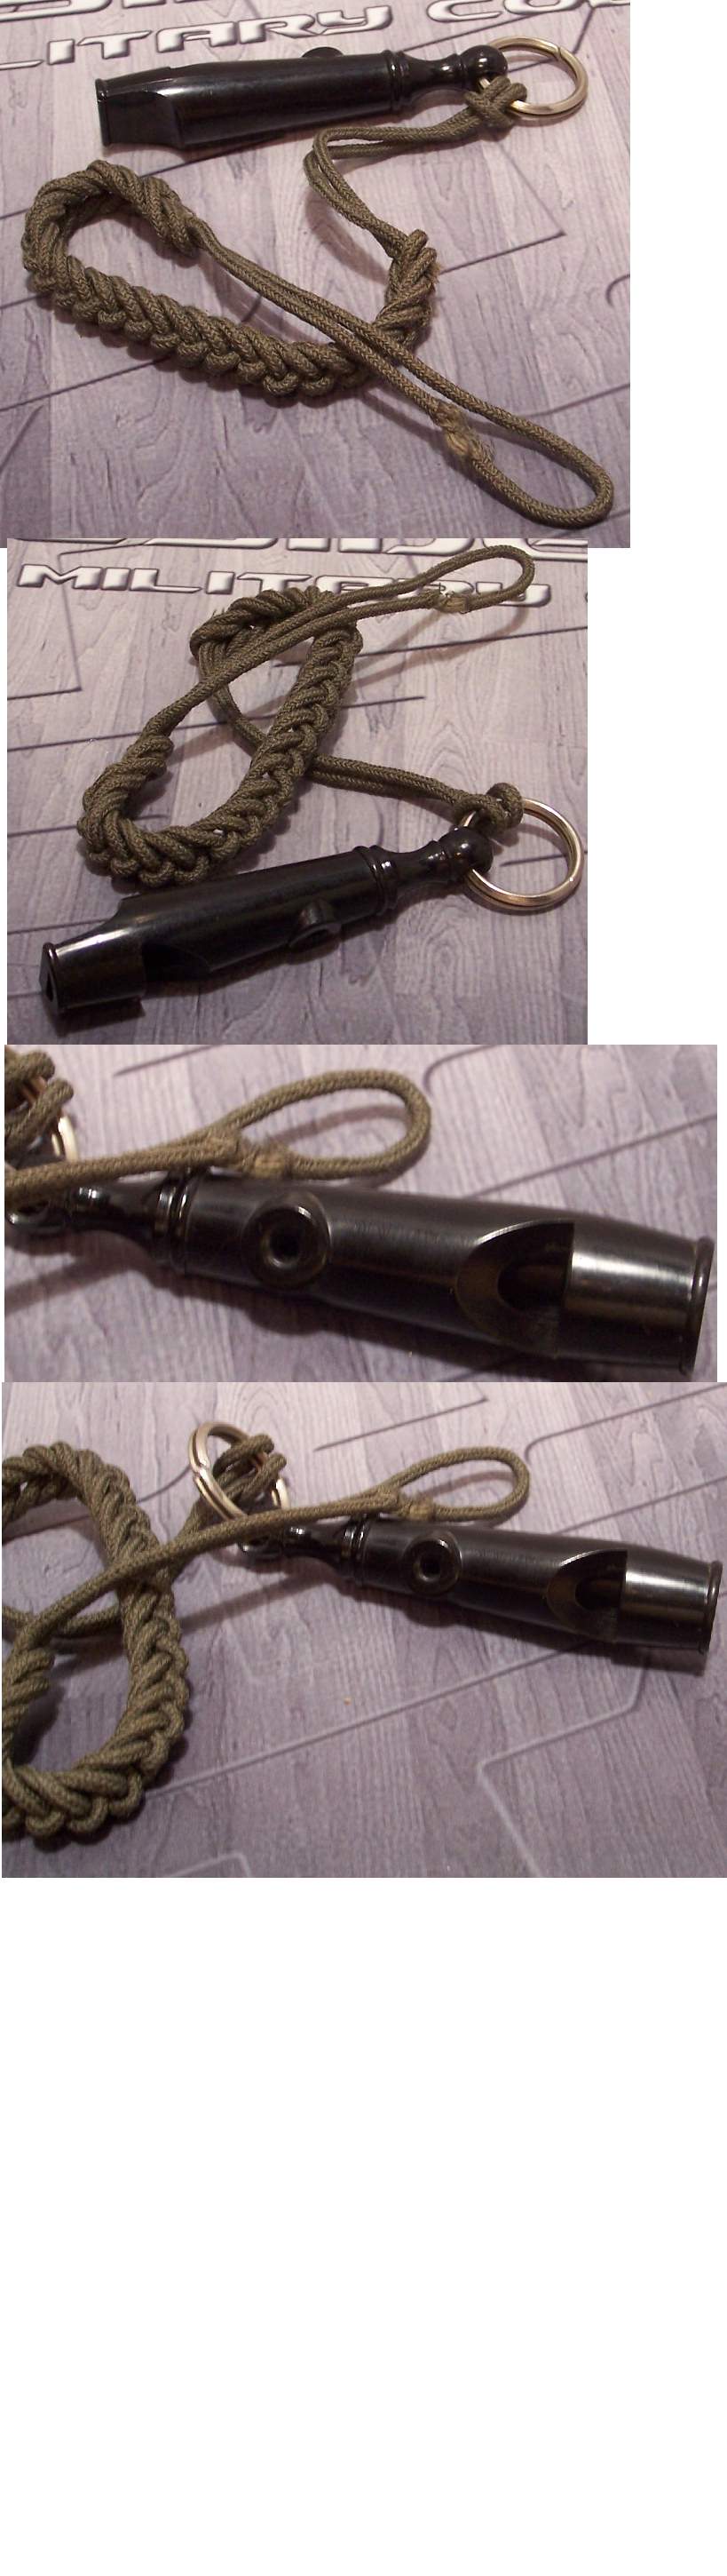 Whistle and Lanyard